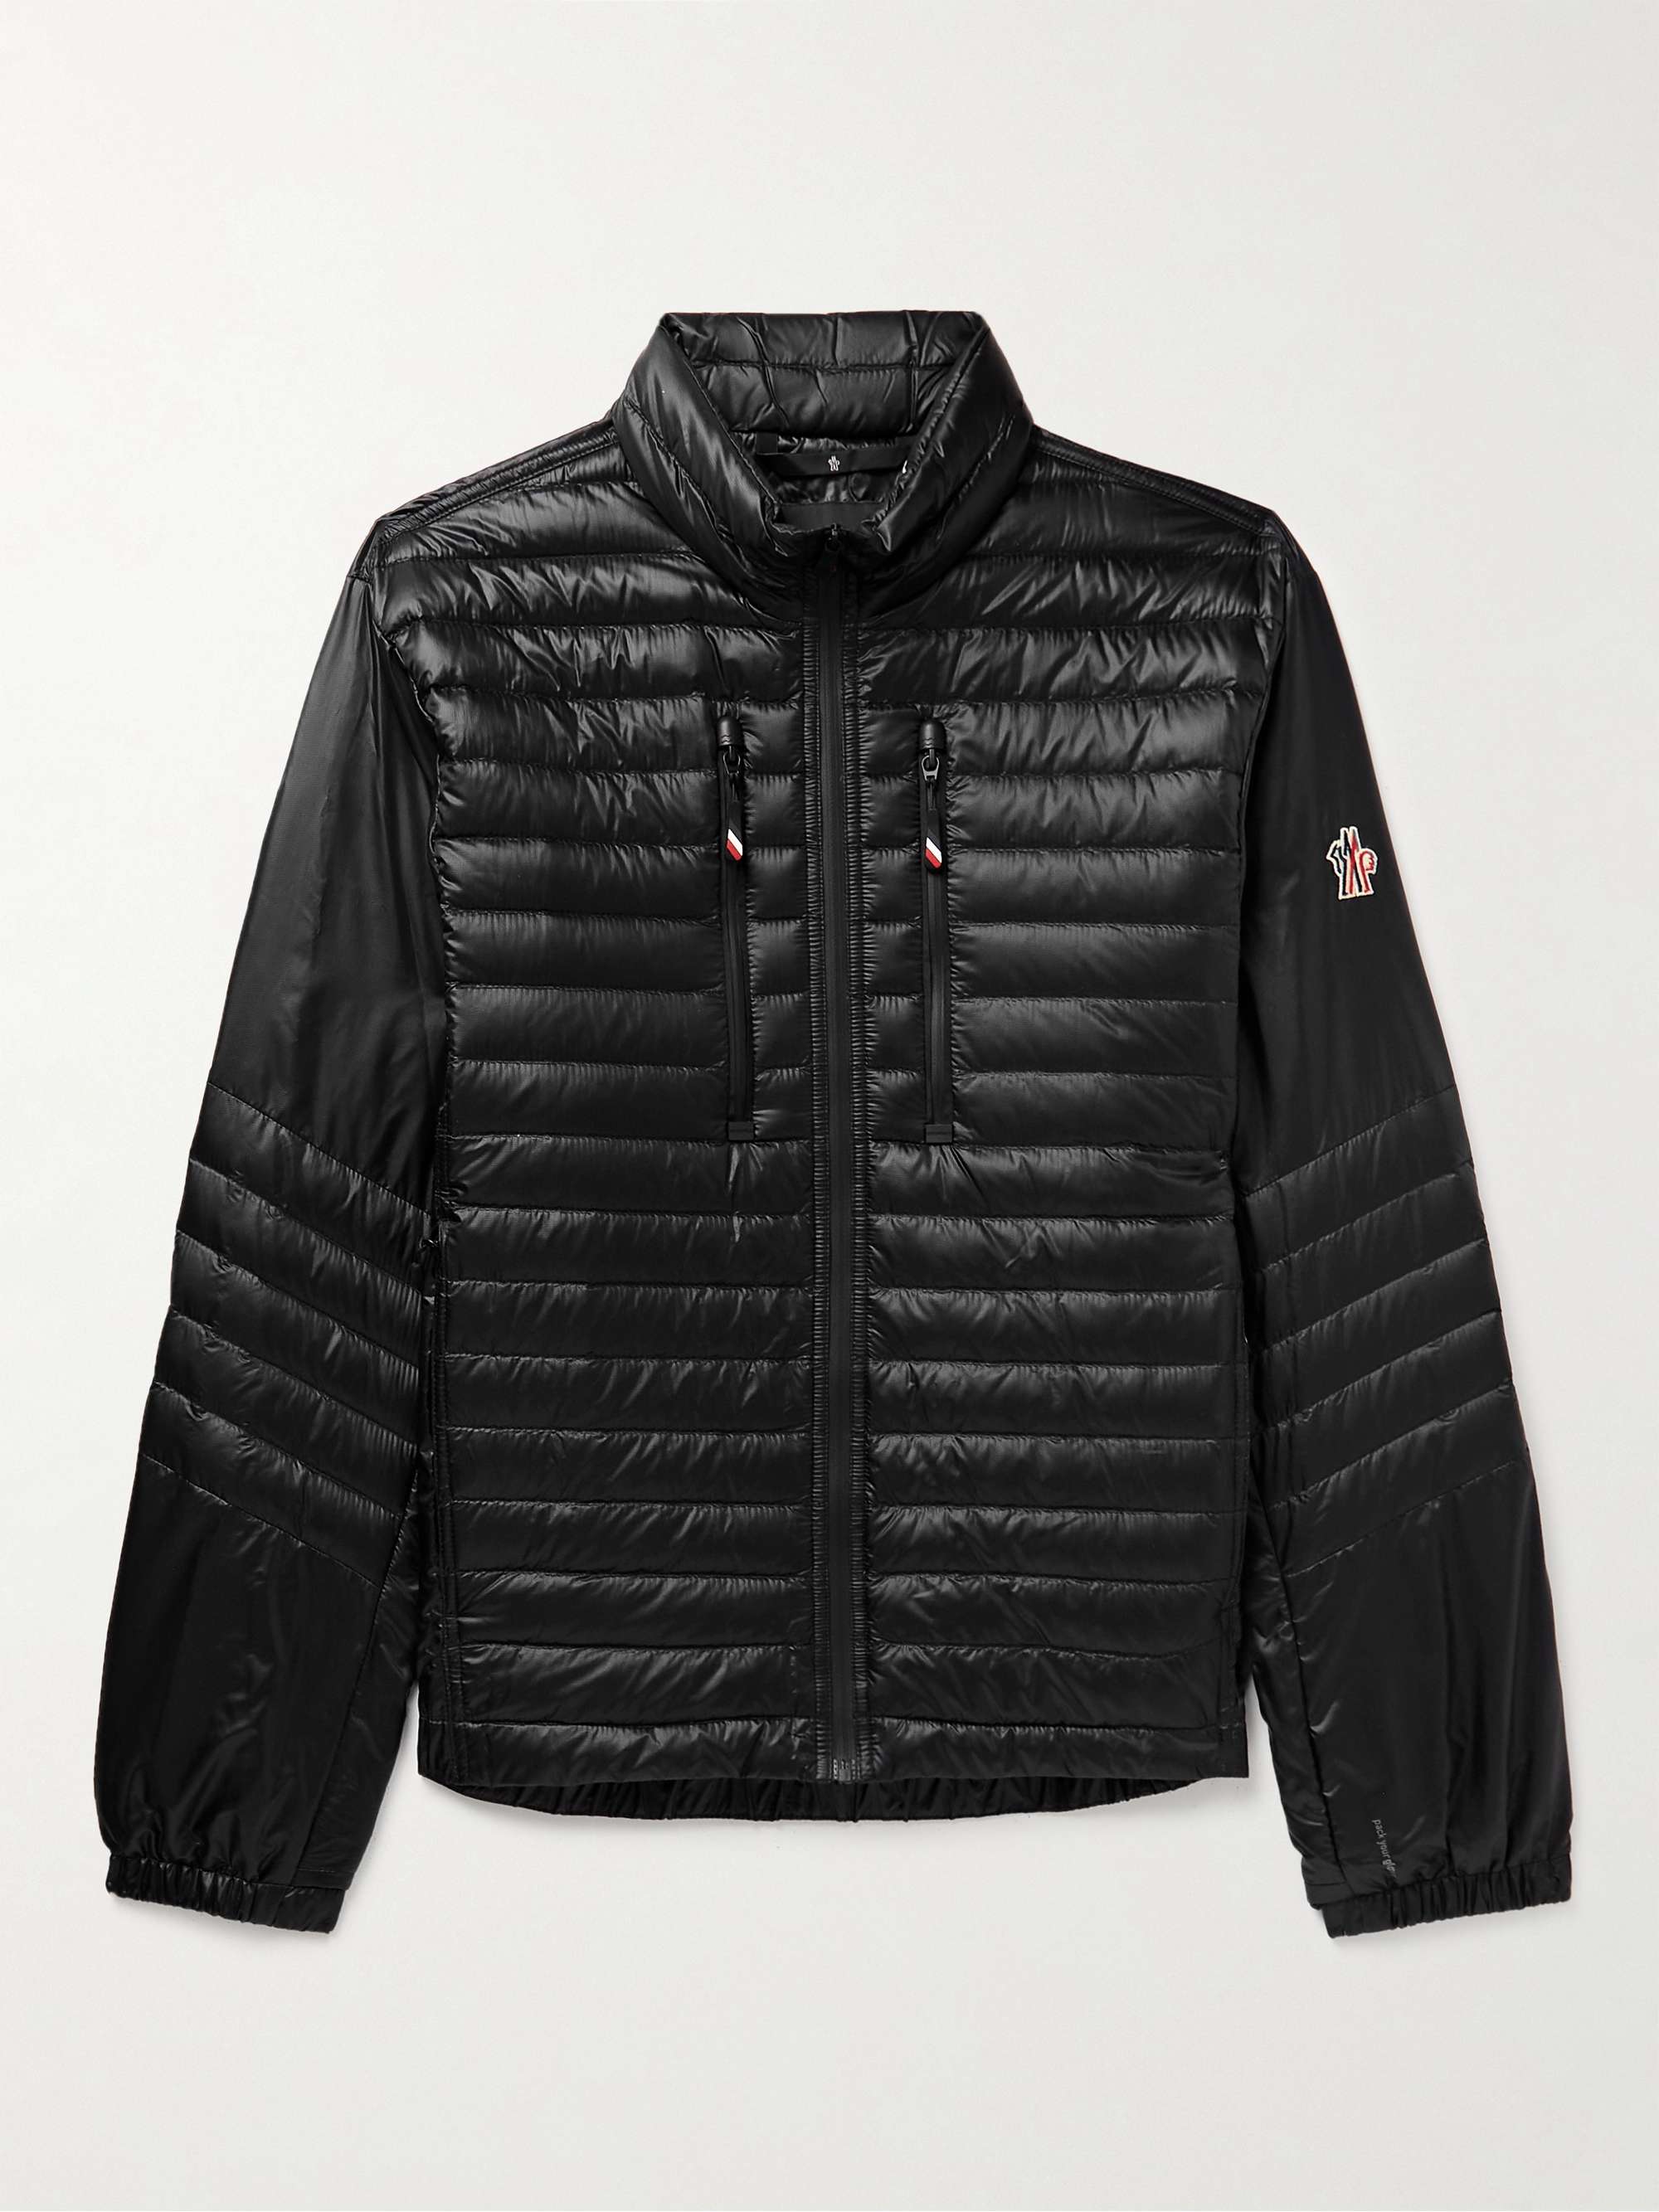 MONCLER GRENOBLE Althaus Logo-Appliquéd Quilted Ripstop Down Jacket